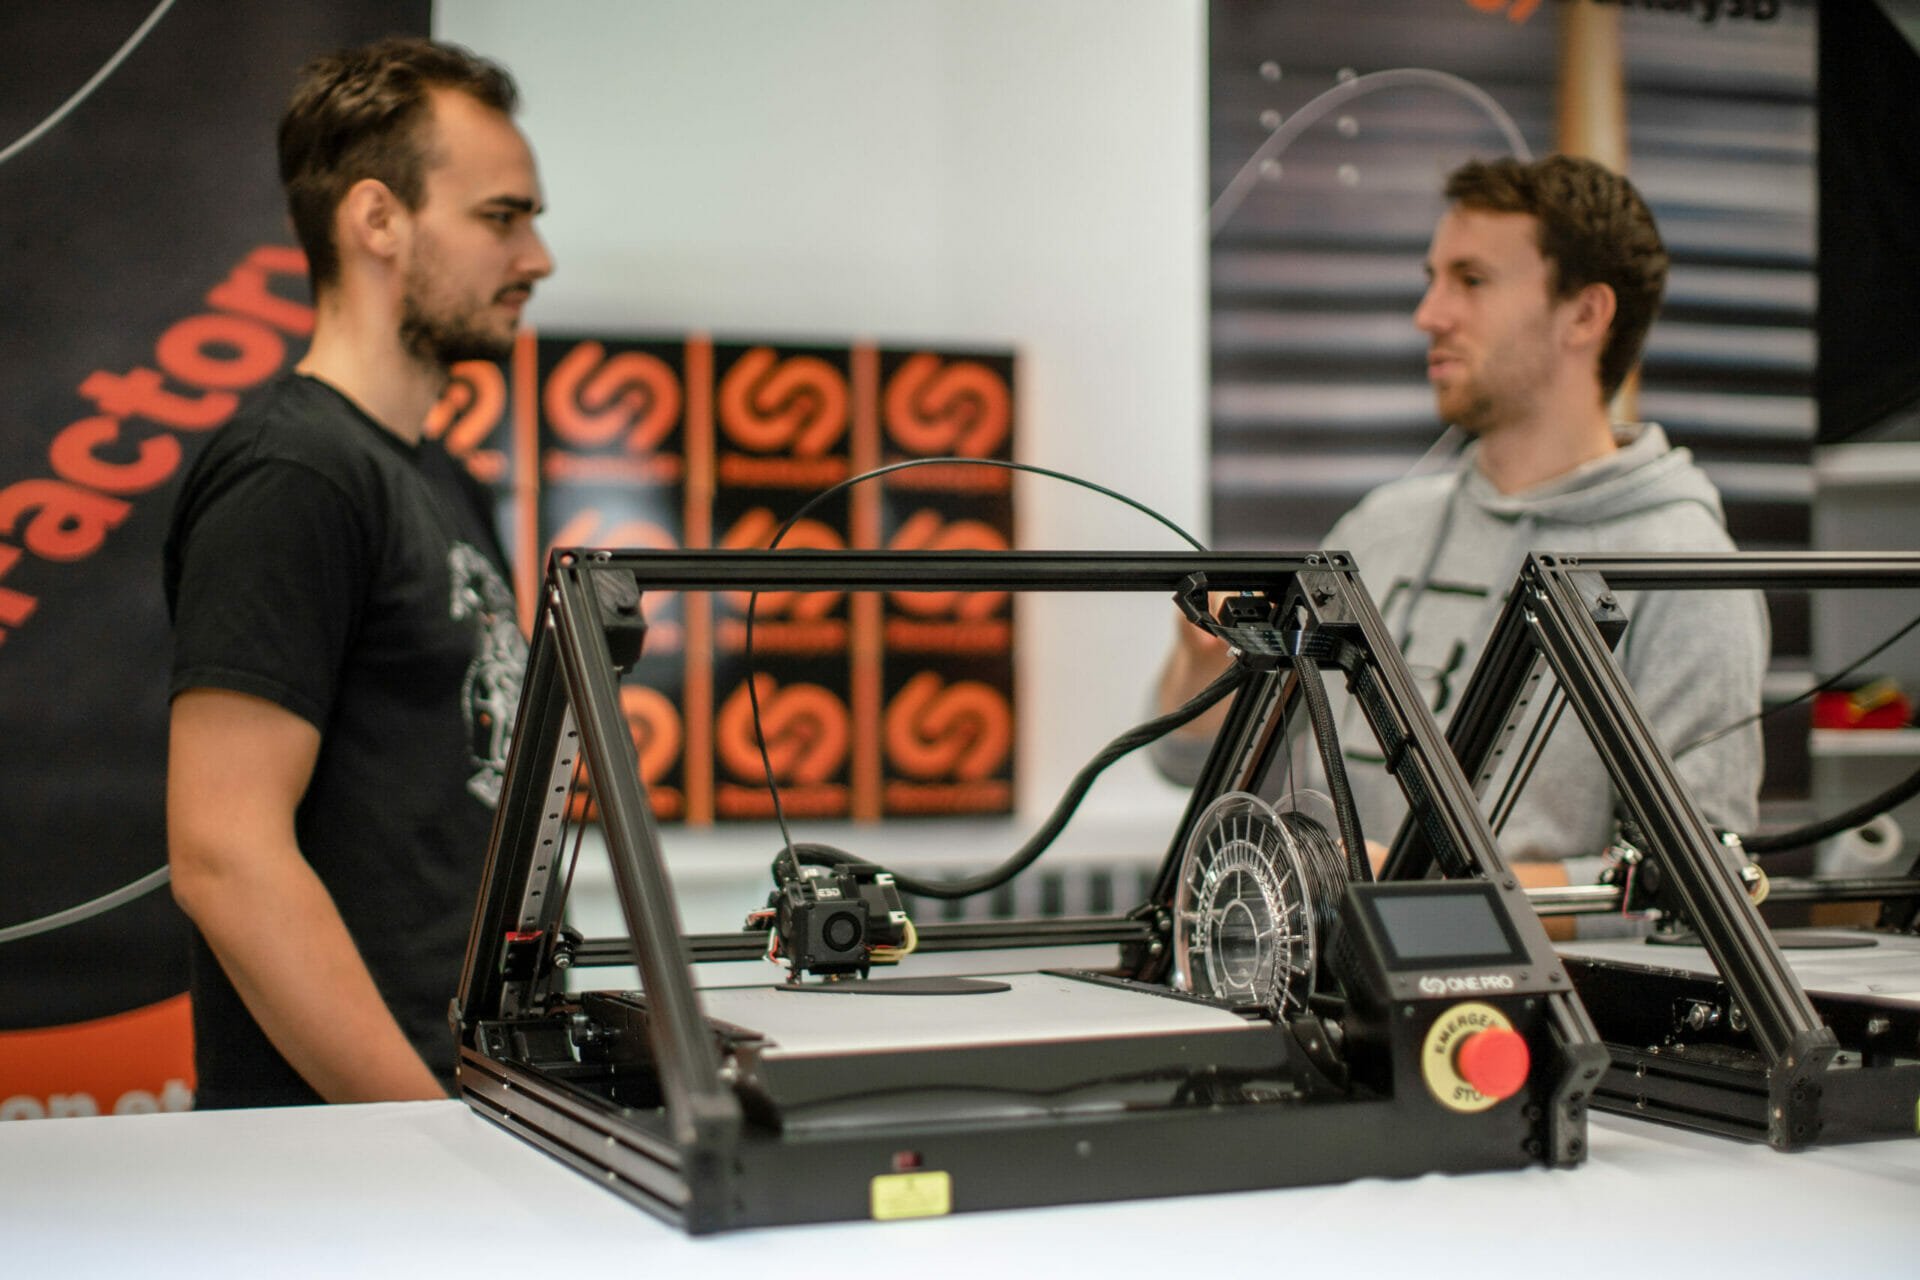 iFactory3D presents 3D belt printer by visiting numerous trade shows